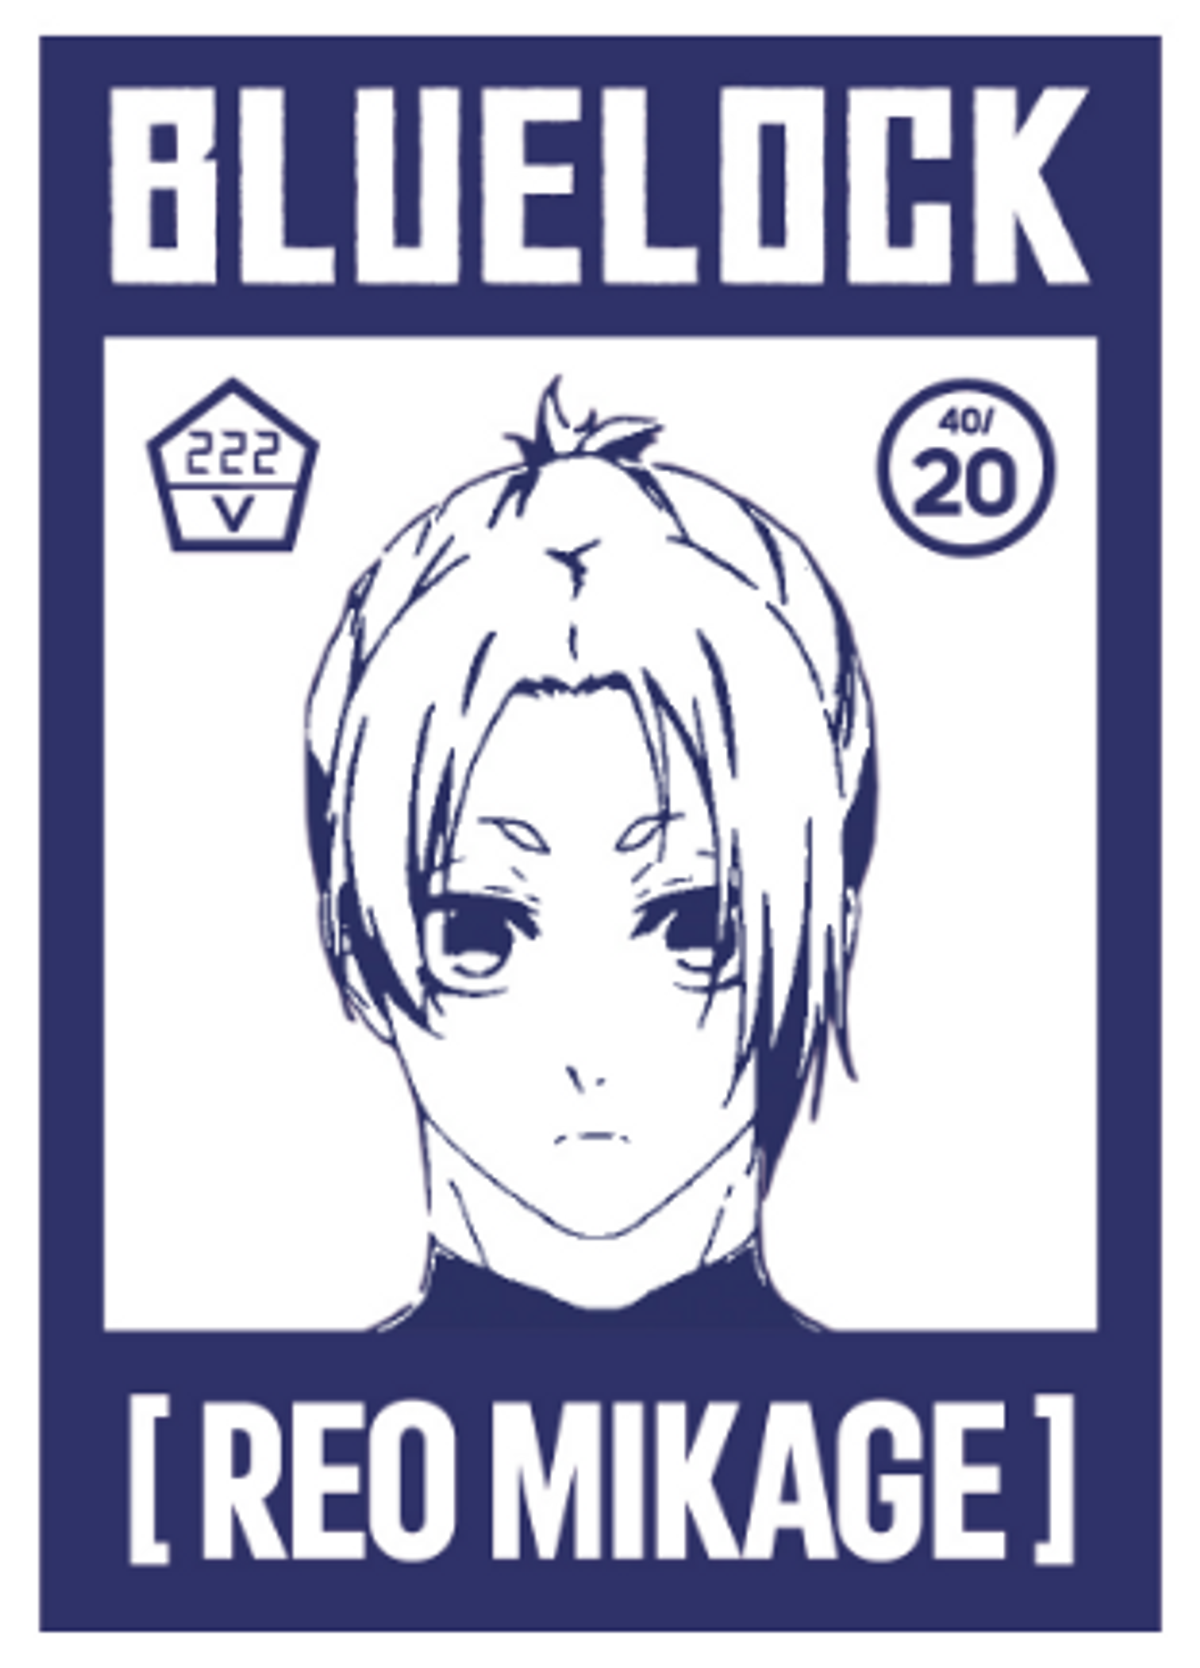 40/20 REO MIKAGE